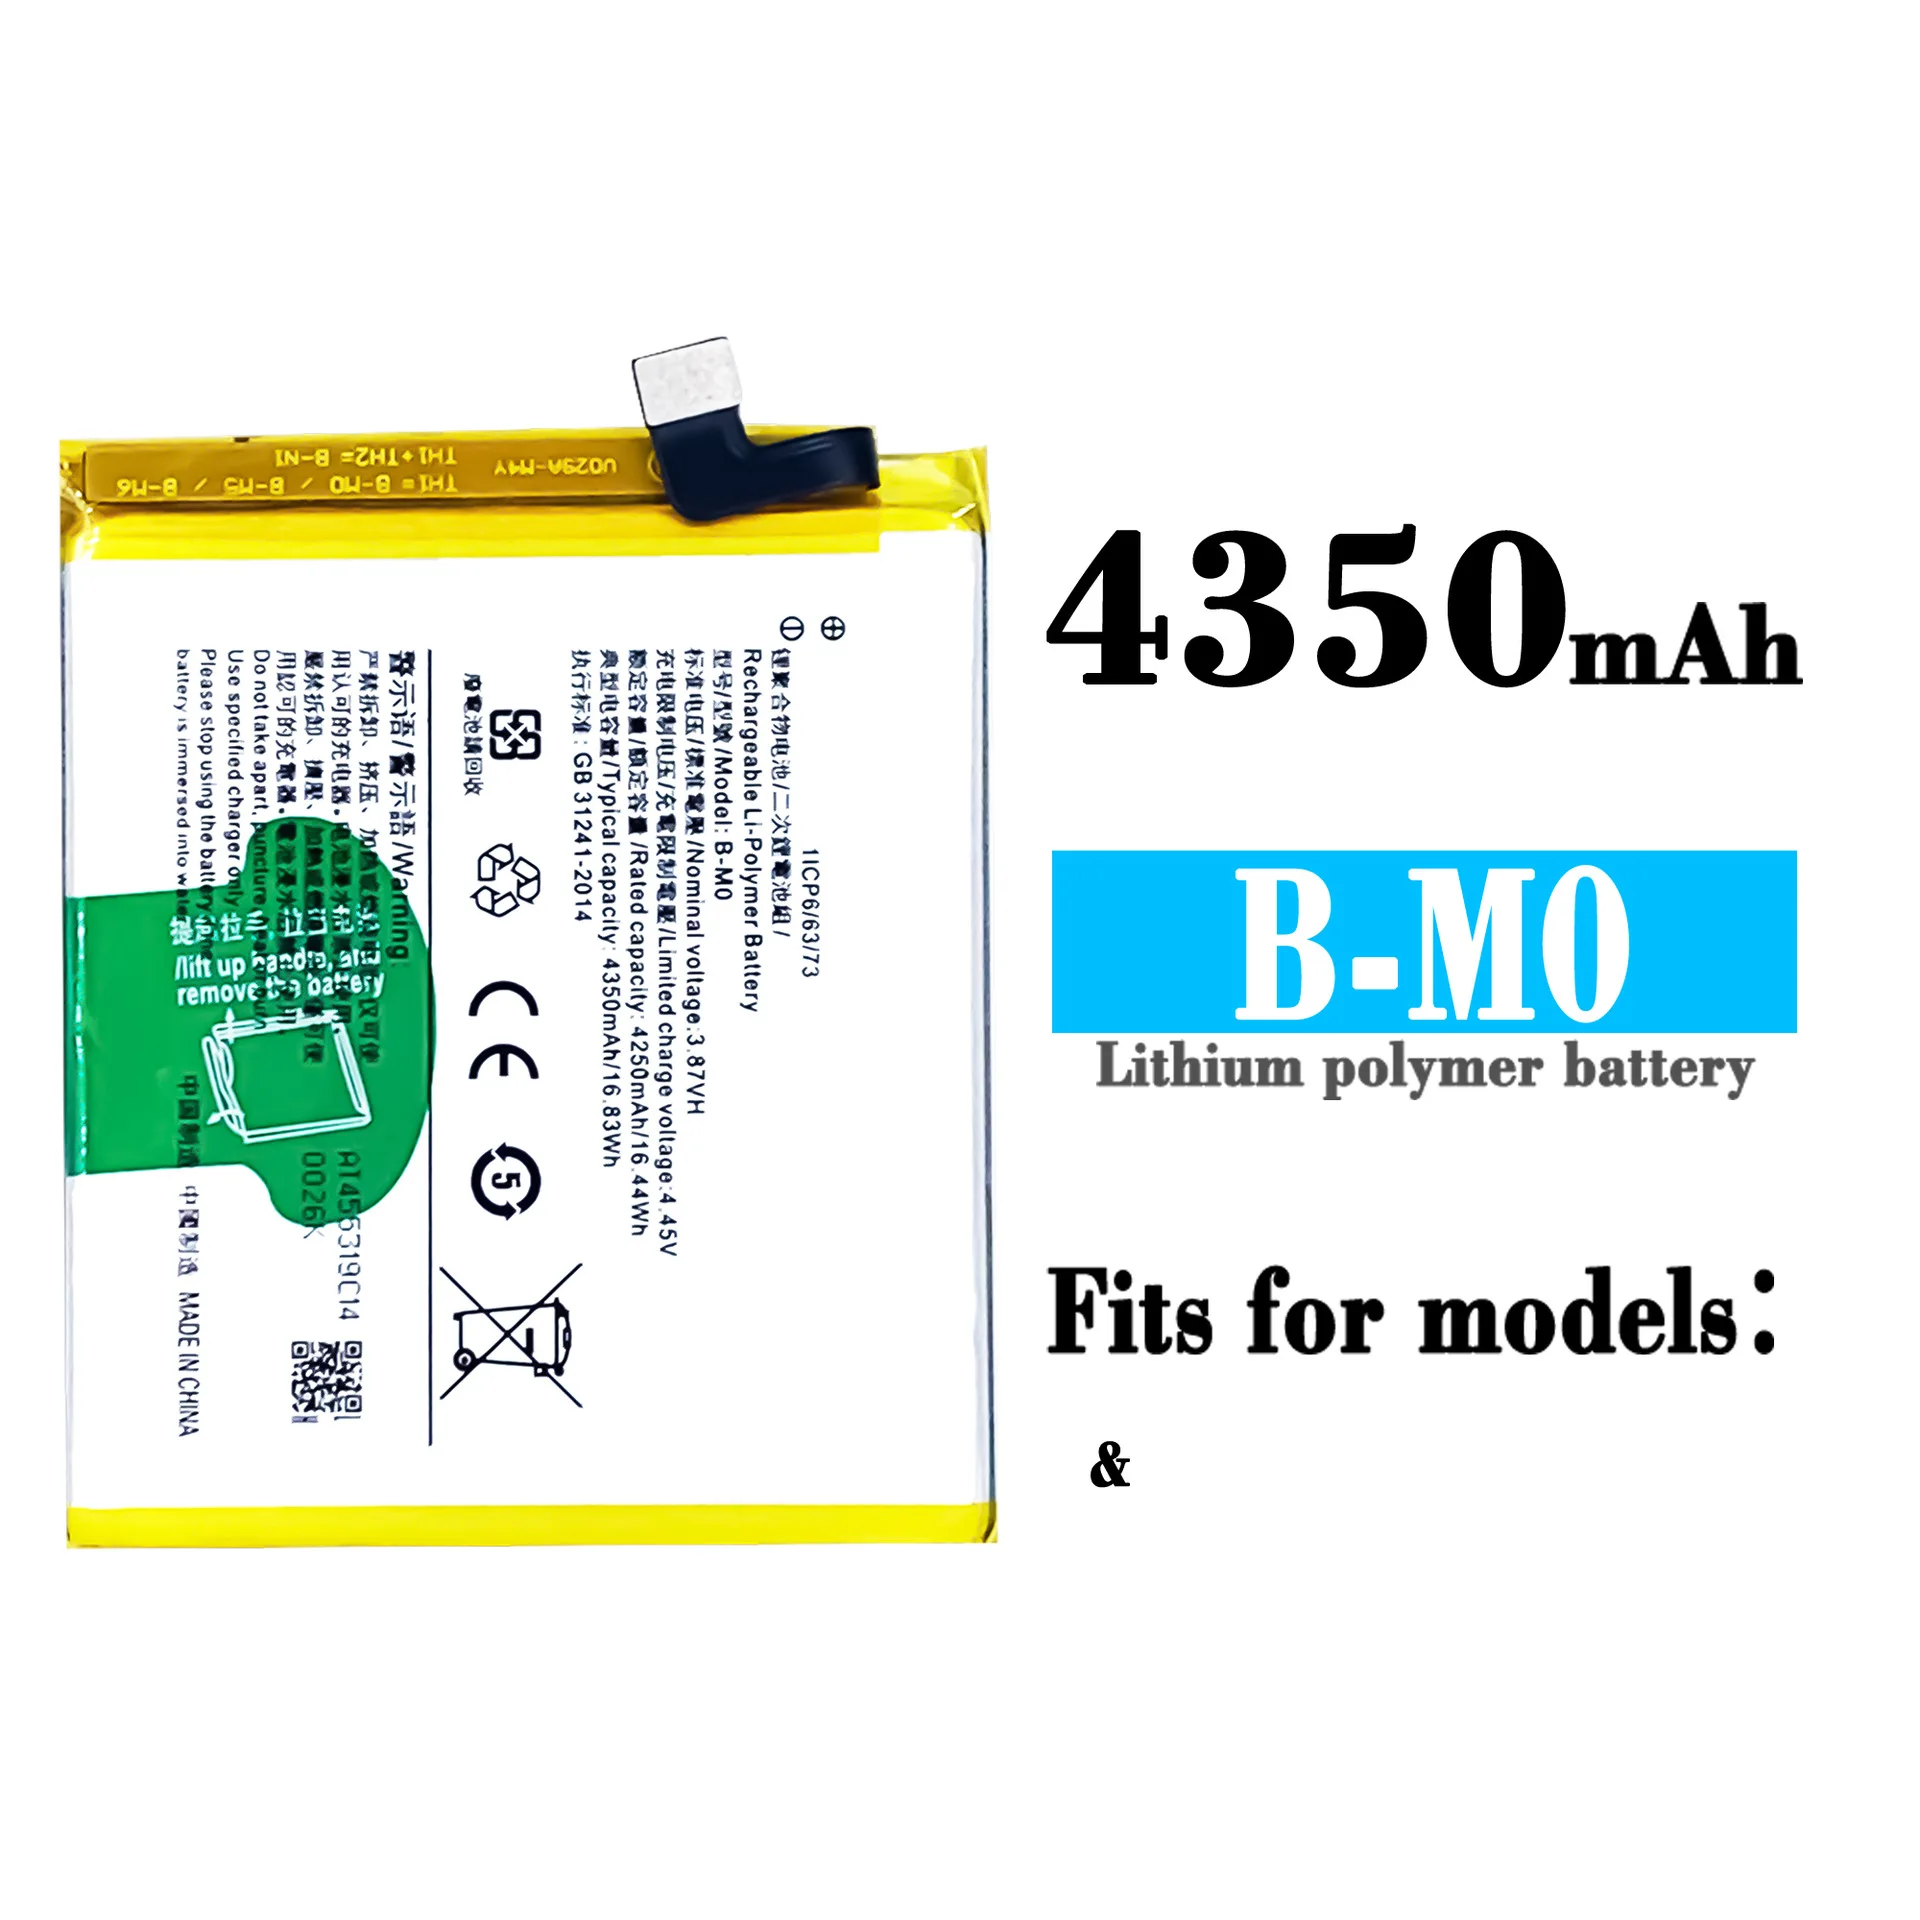 

100% Orginal High Quality Replacement Battery For VIVO B-M0 B-MO 4350mAh New Built-in Large Capacity Lithium Batteries